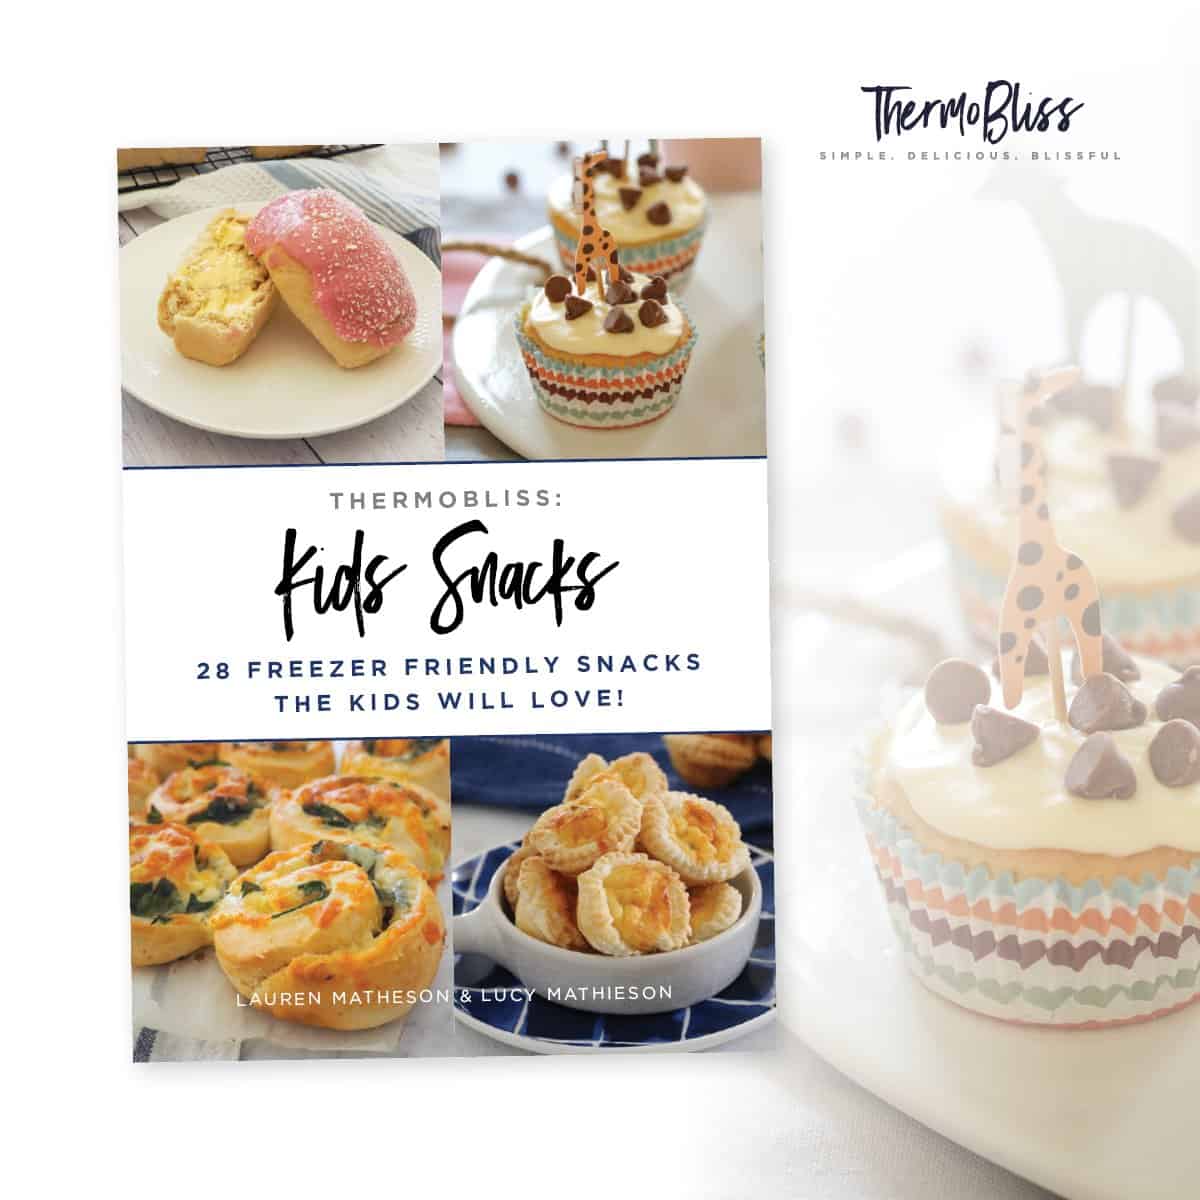 A ThermoBliss recipe book 'Kids Snacks'